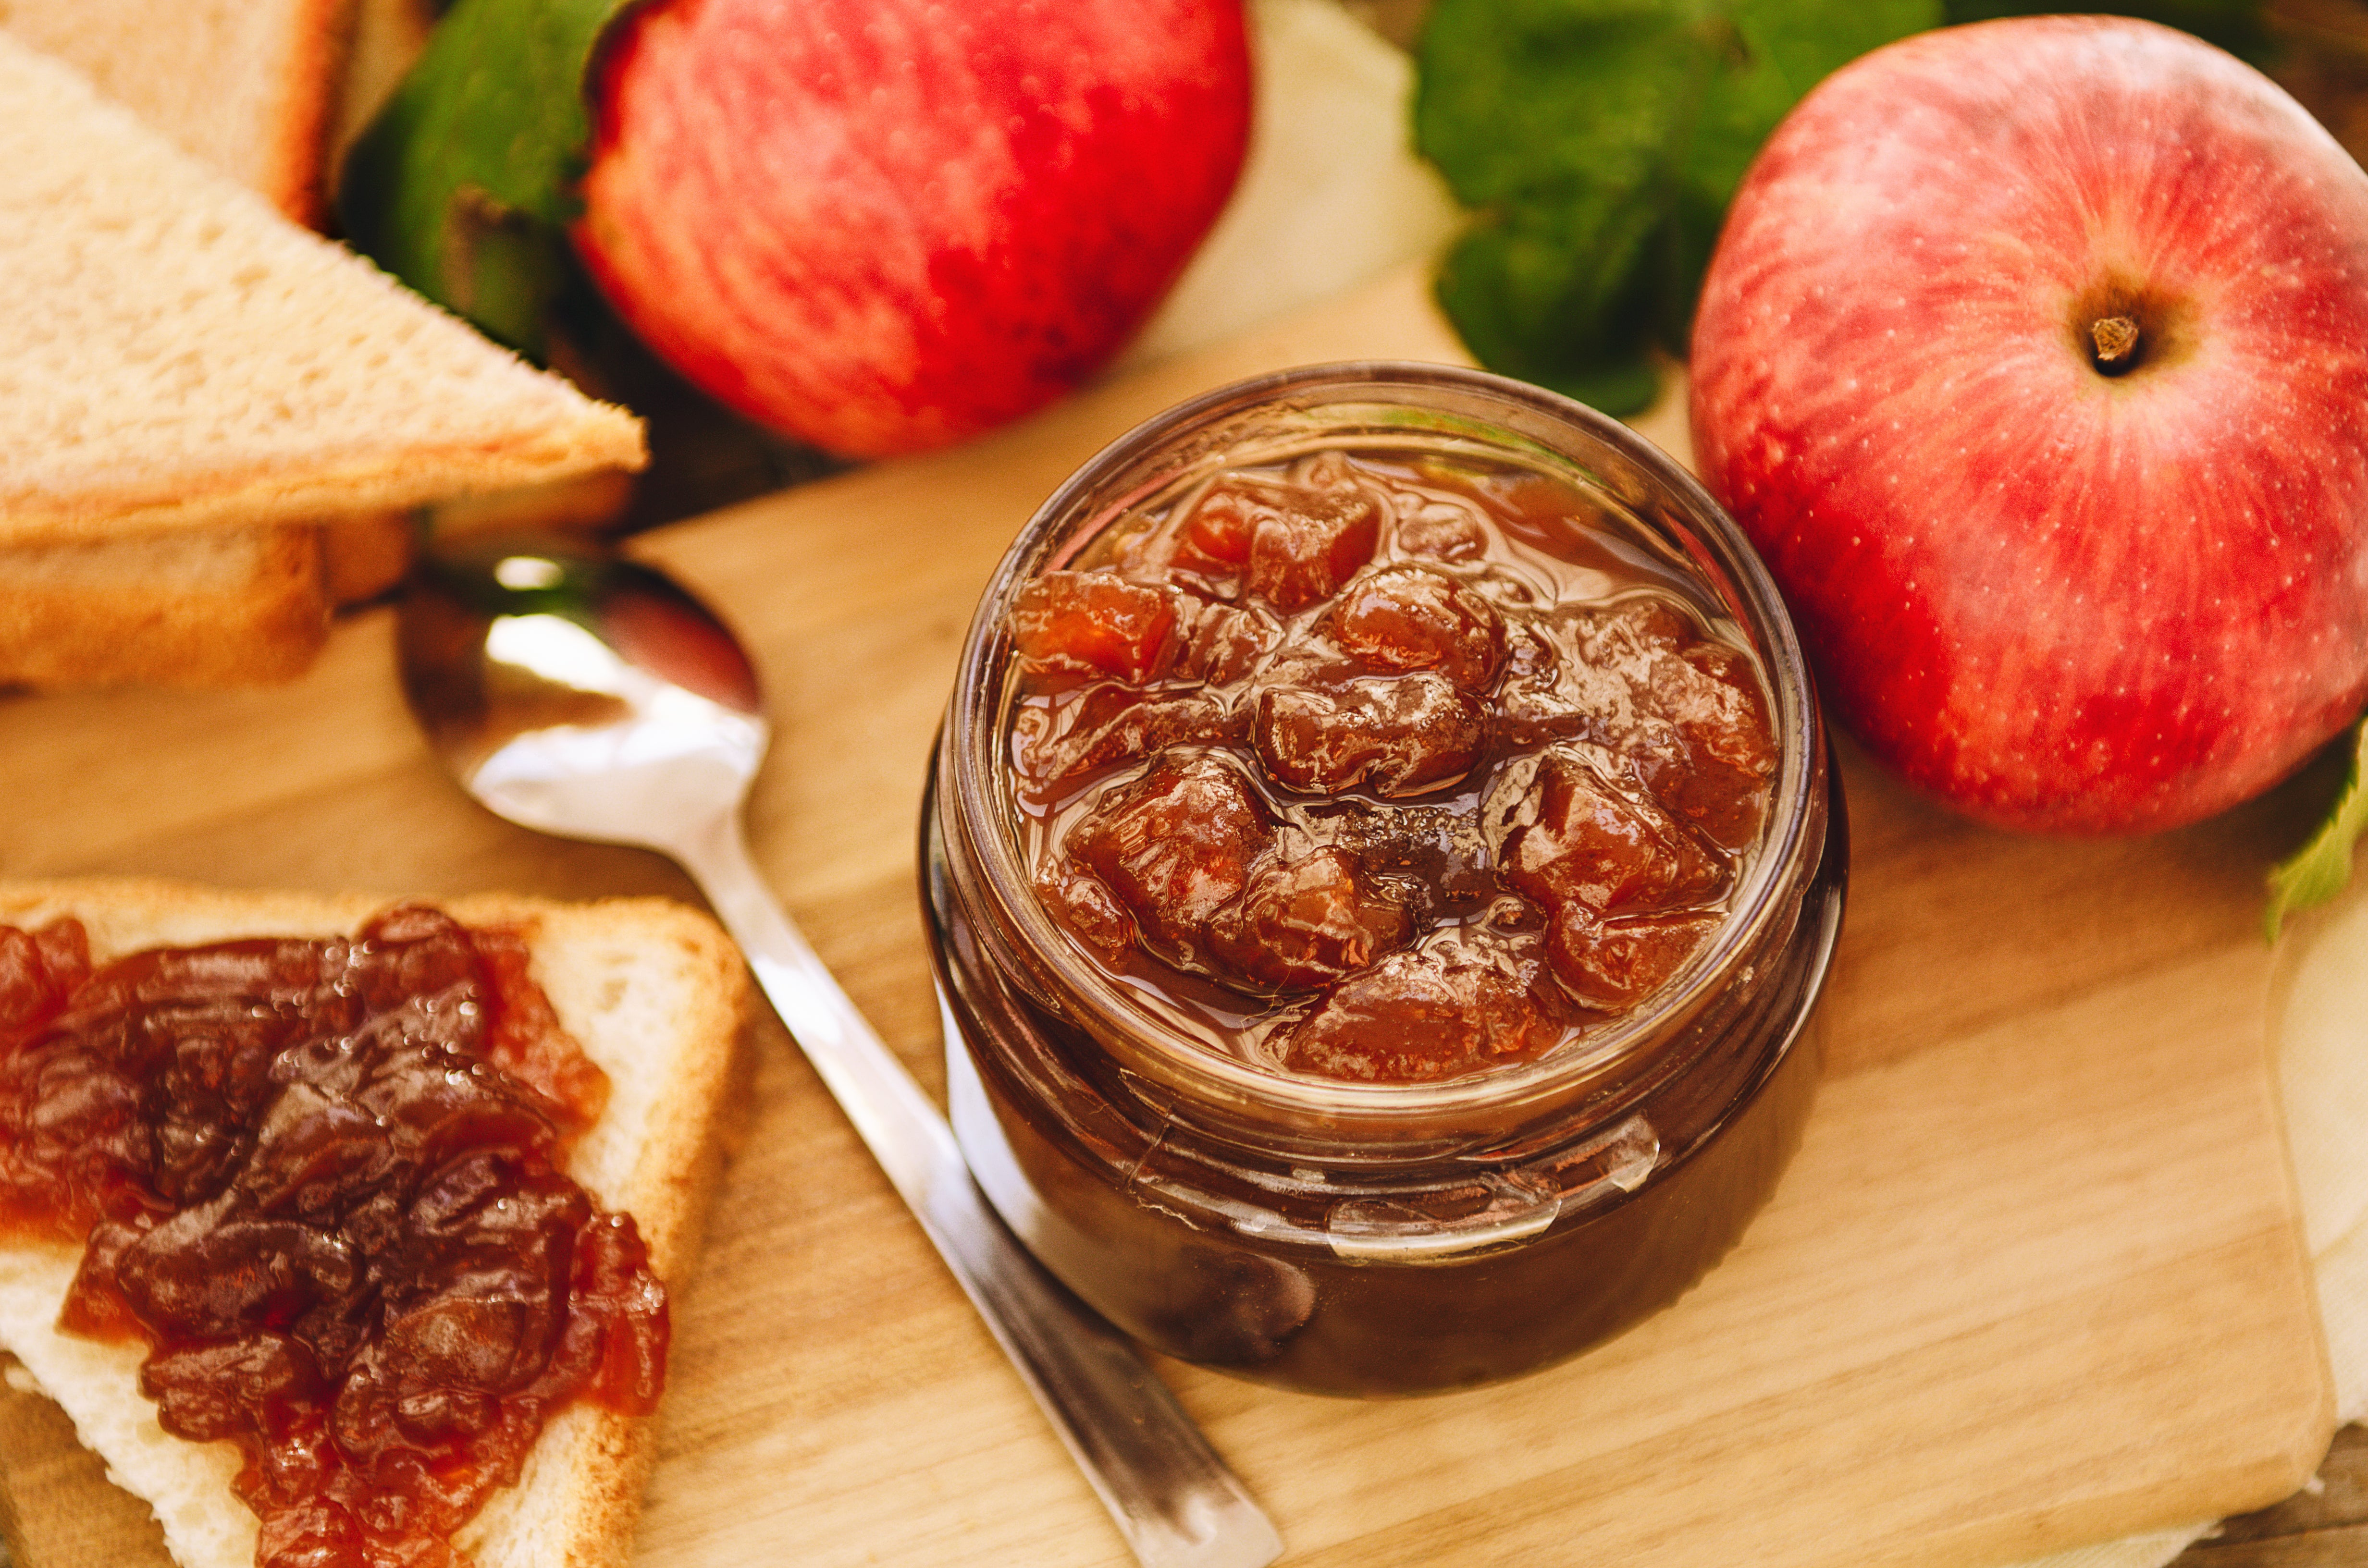 Making jelly from fresh apples is a process-lover’s dream